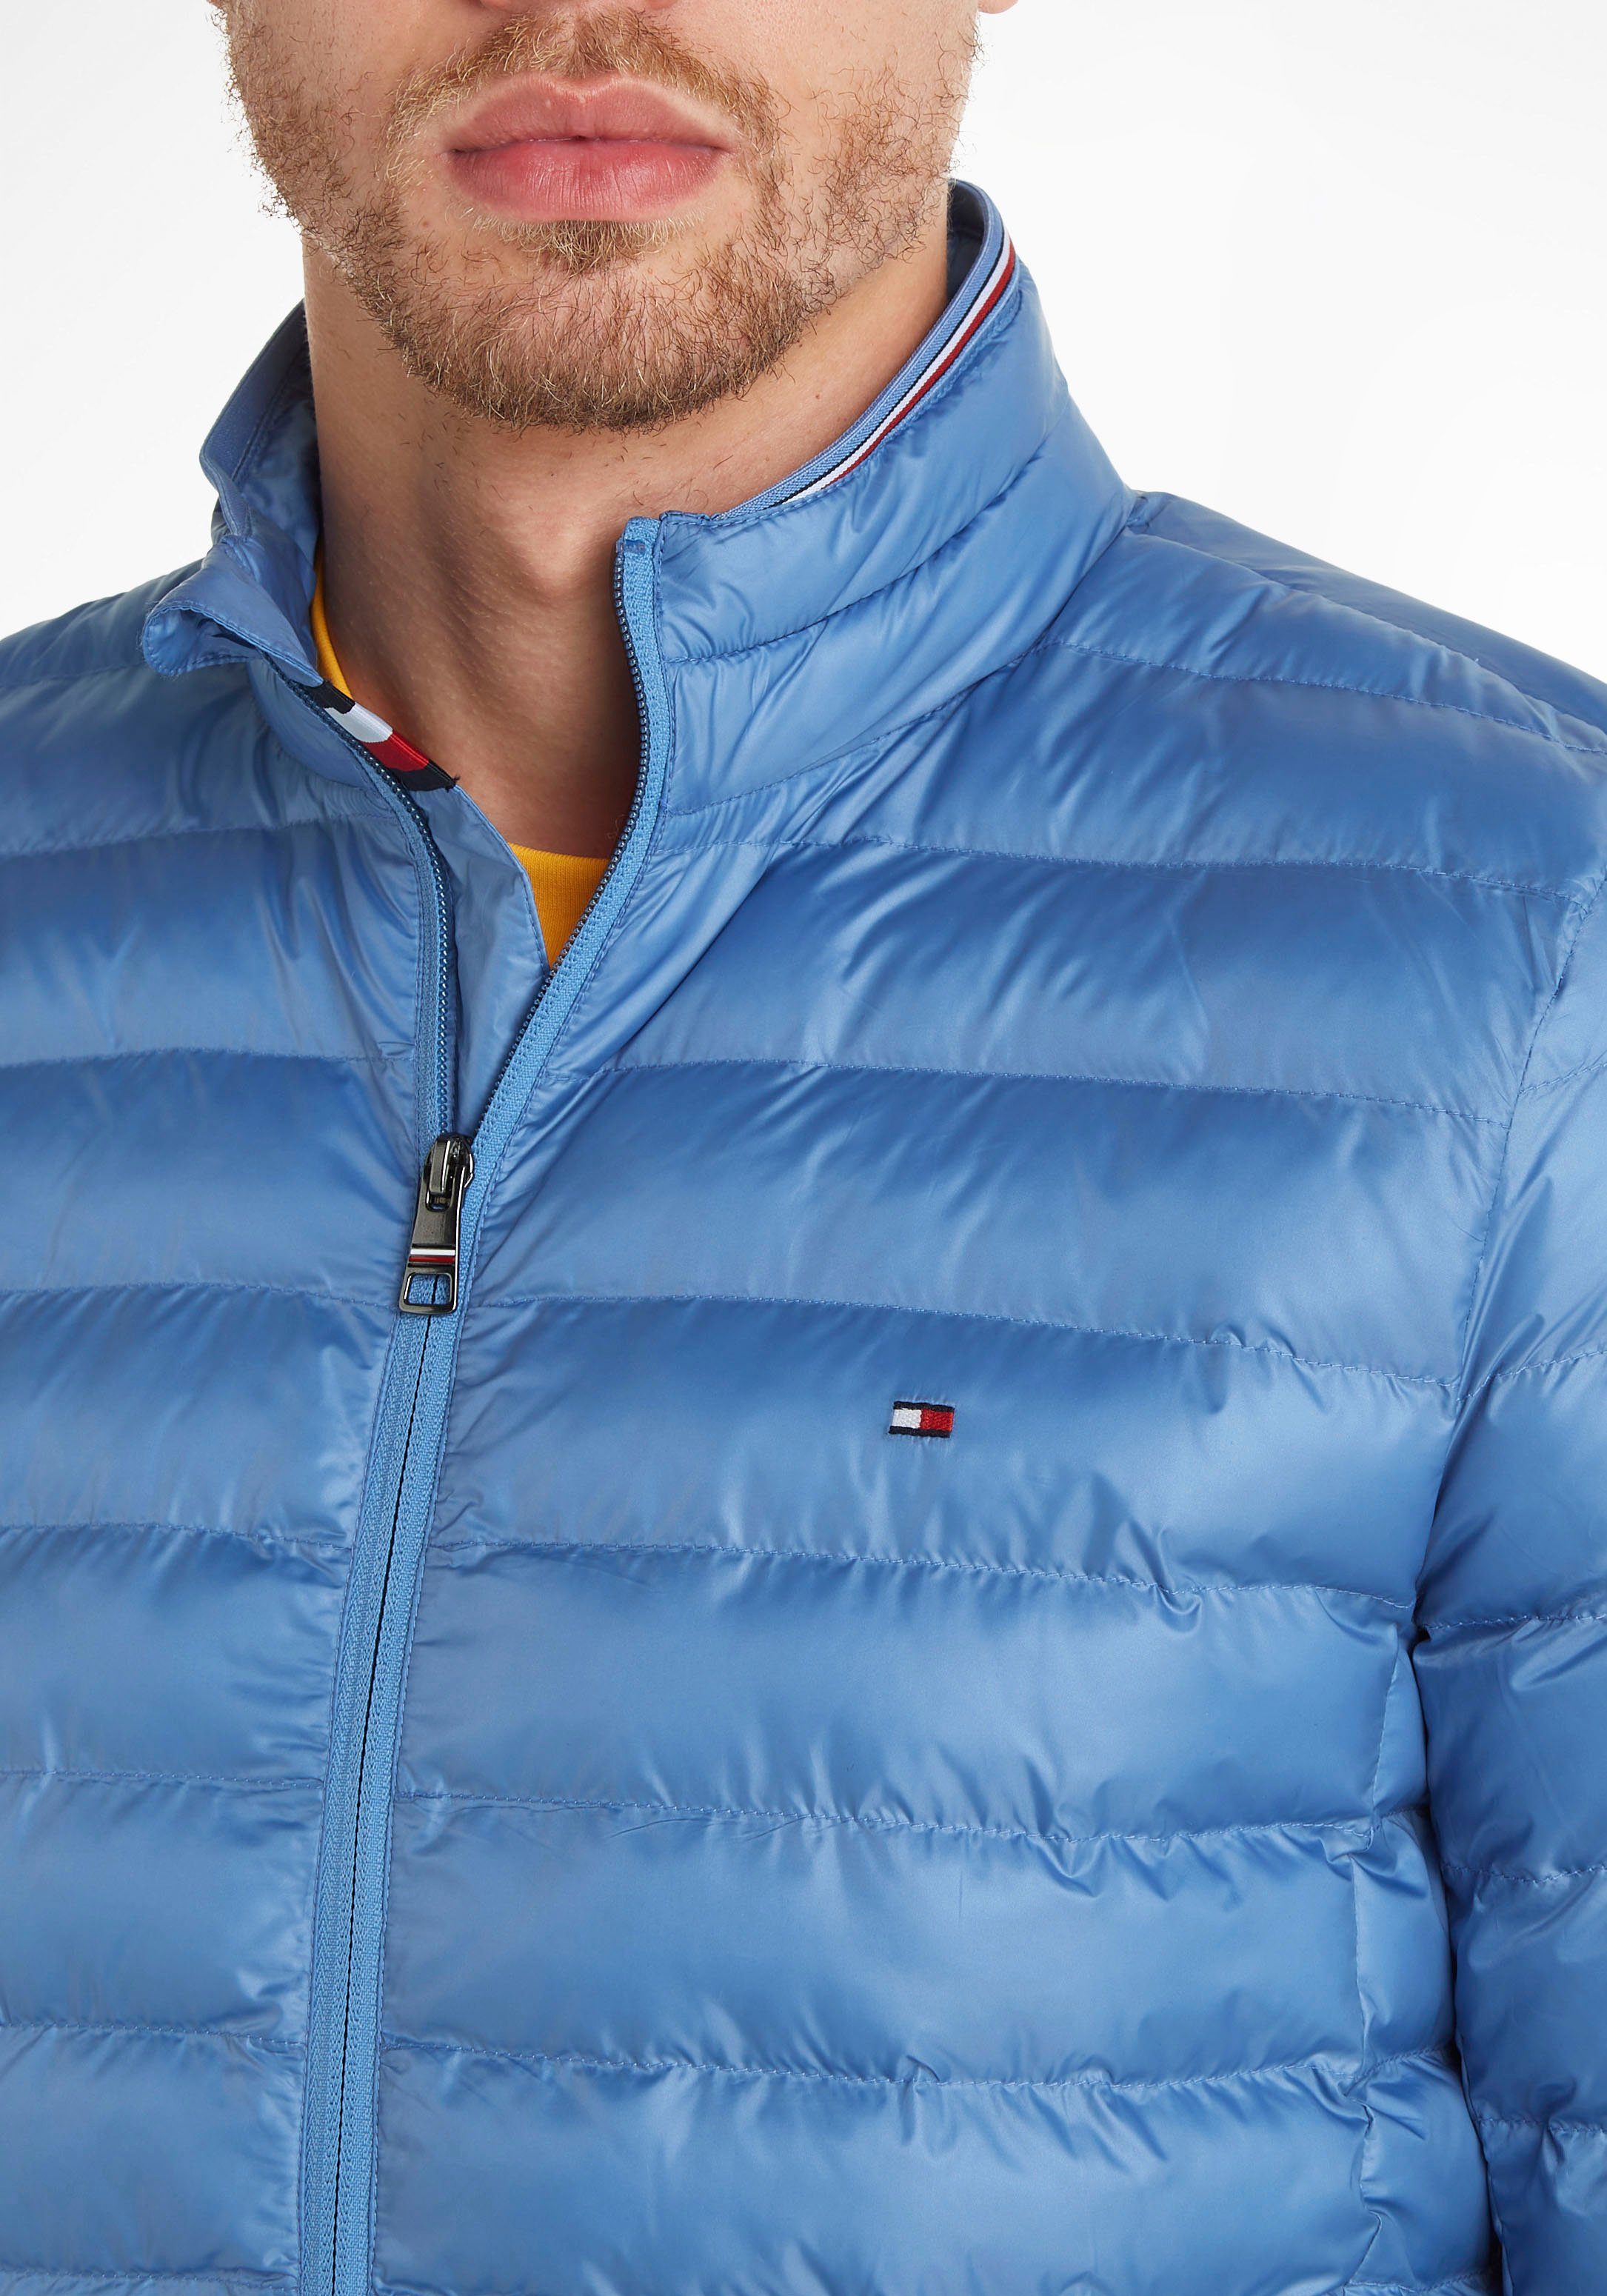 Tommy Hilfiger Steppjacke PACKABLE SkyCloud Hilfiger JACKET Logostickerei mit RECYCLED Tommy